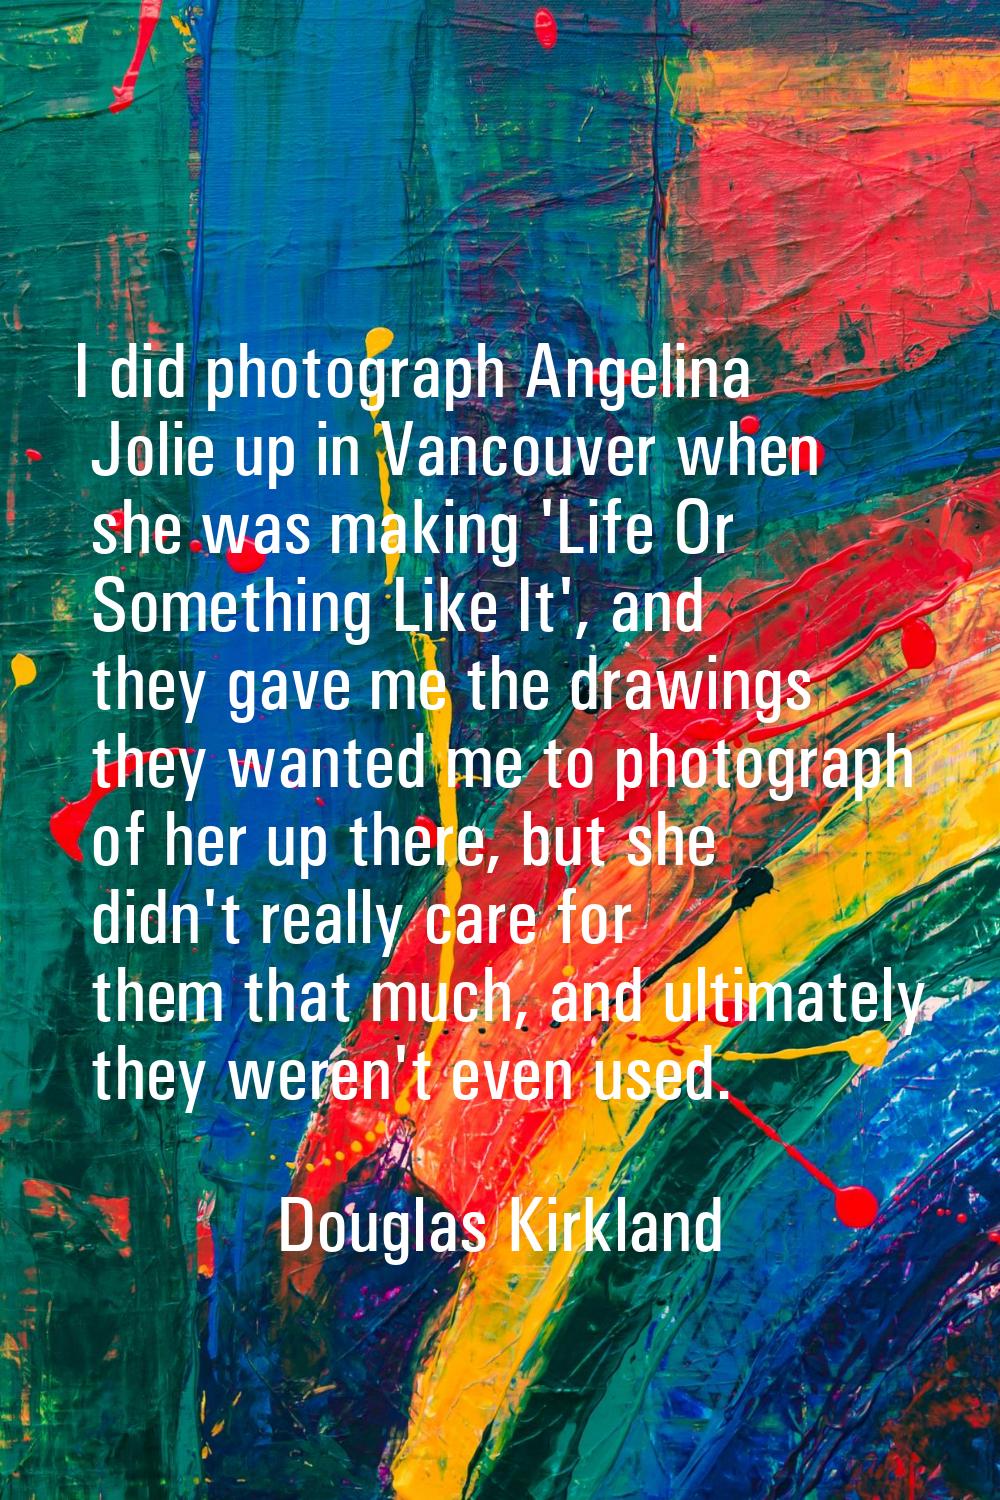 I did photograph Angelina Jolie up in Vancouver when she was making 'Life Or Something Like It', an